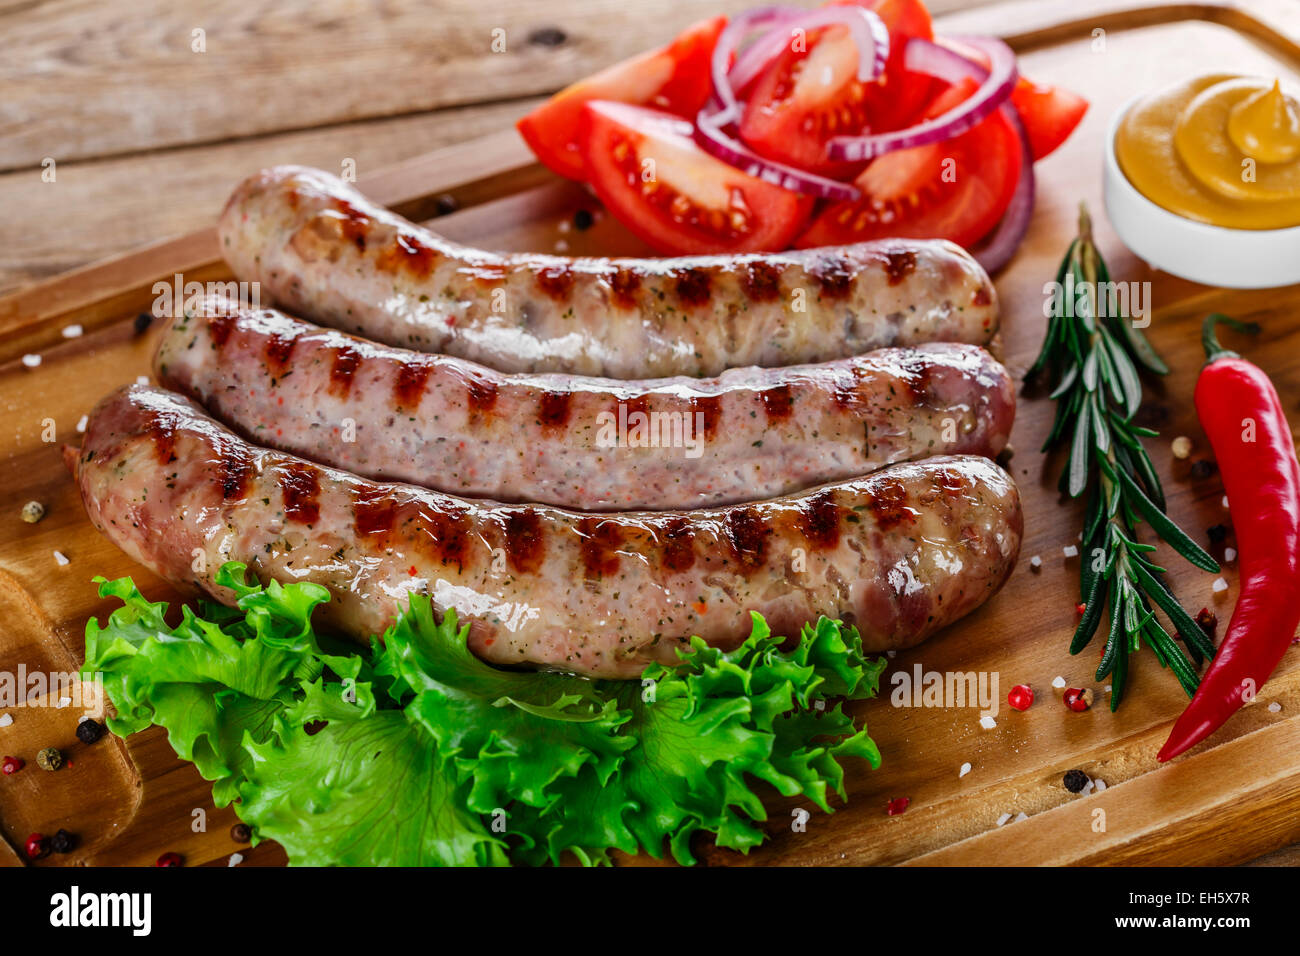 Grilled sausages with french fries on a cutting board Stock Photo